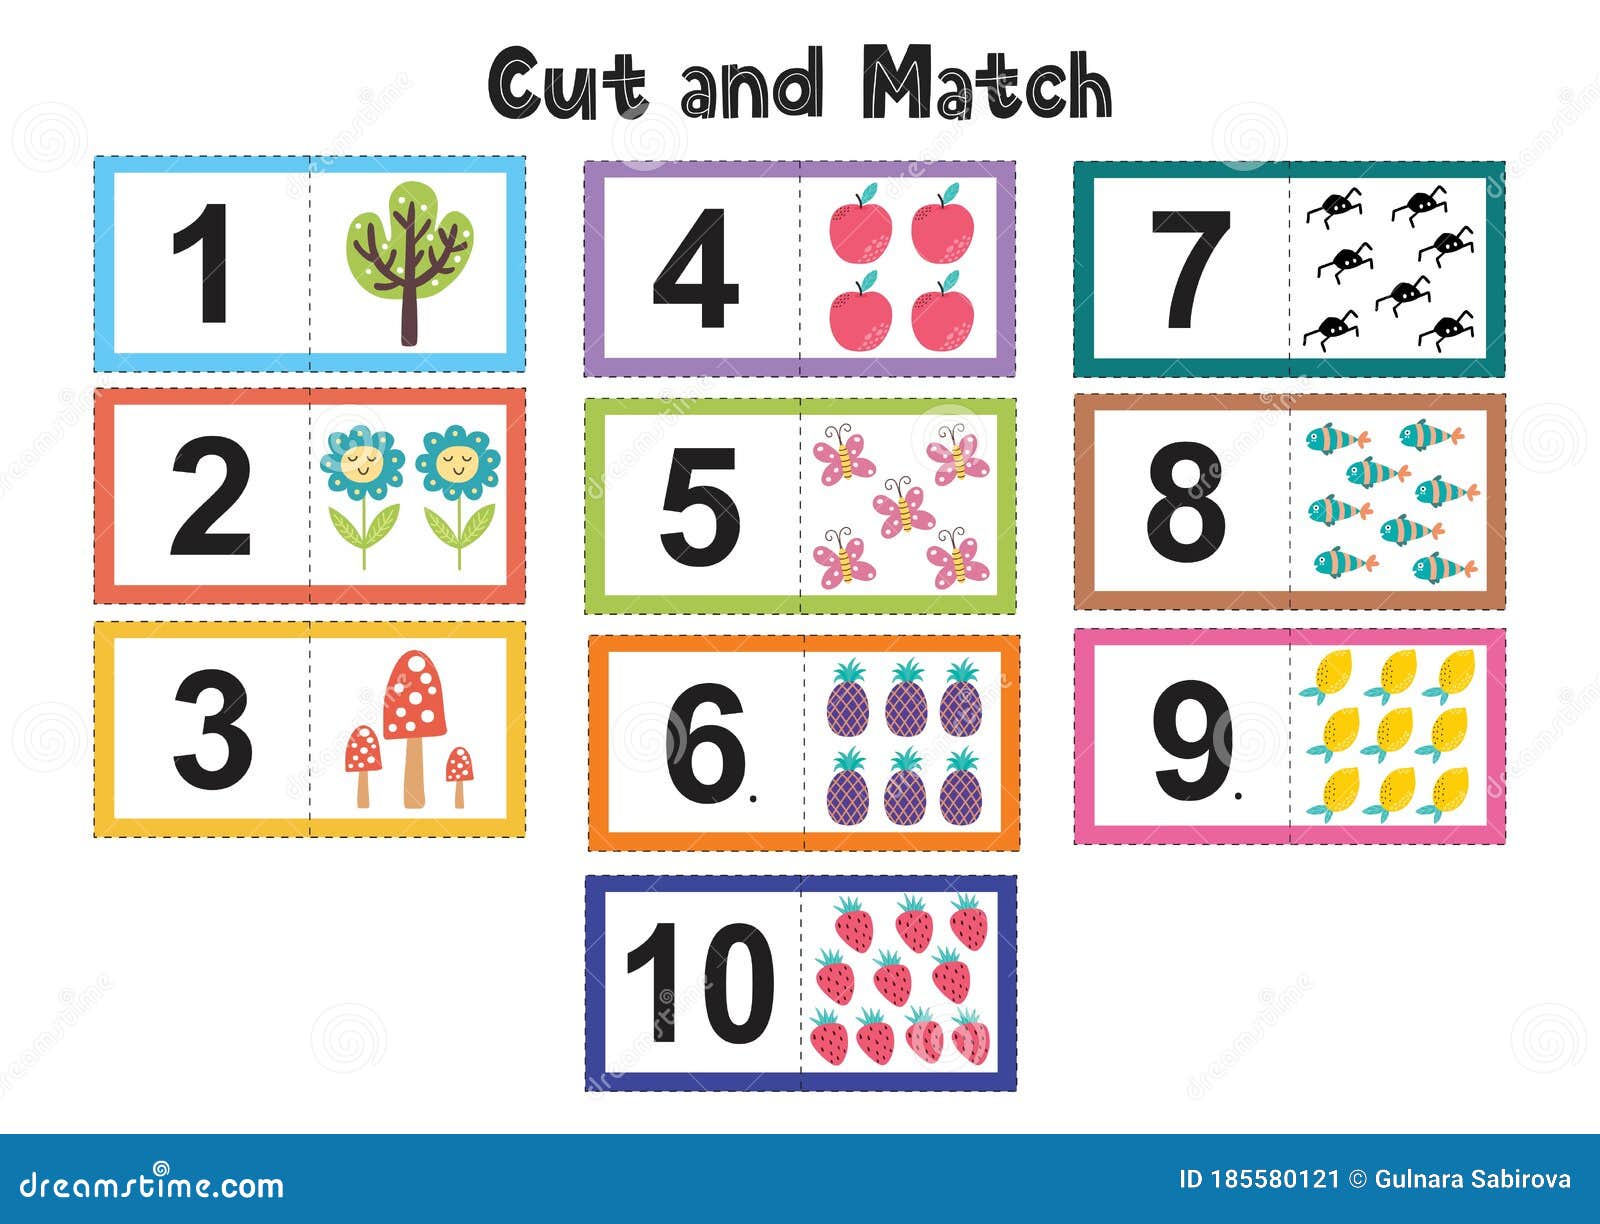 2nd-5th Grade Math Numbers Flashcards. 22 Prime Numbers Laminated Flashcards 